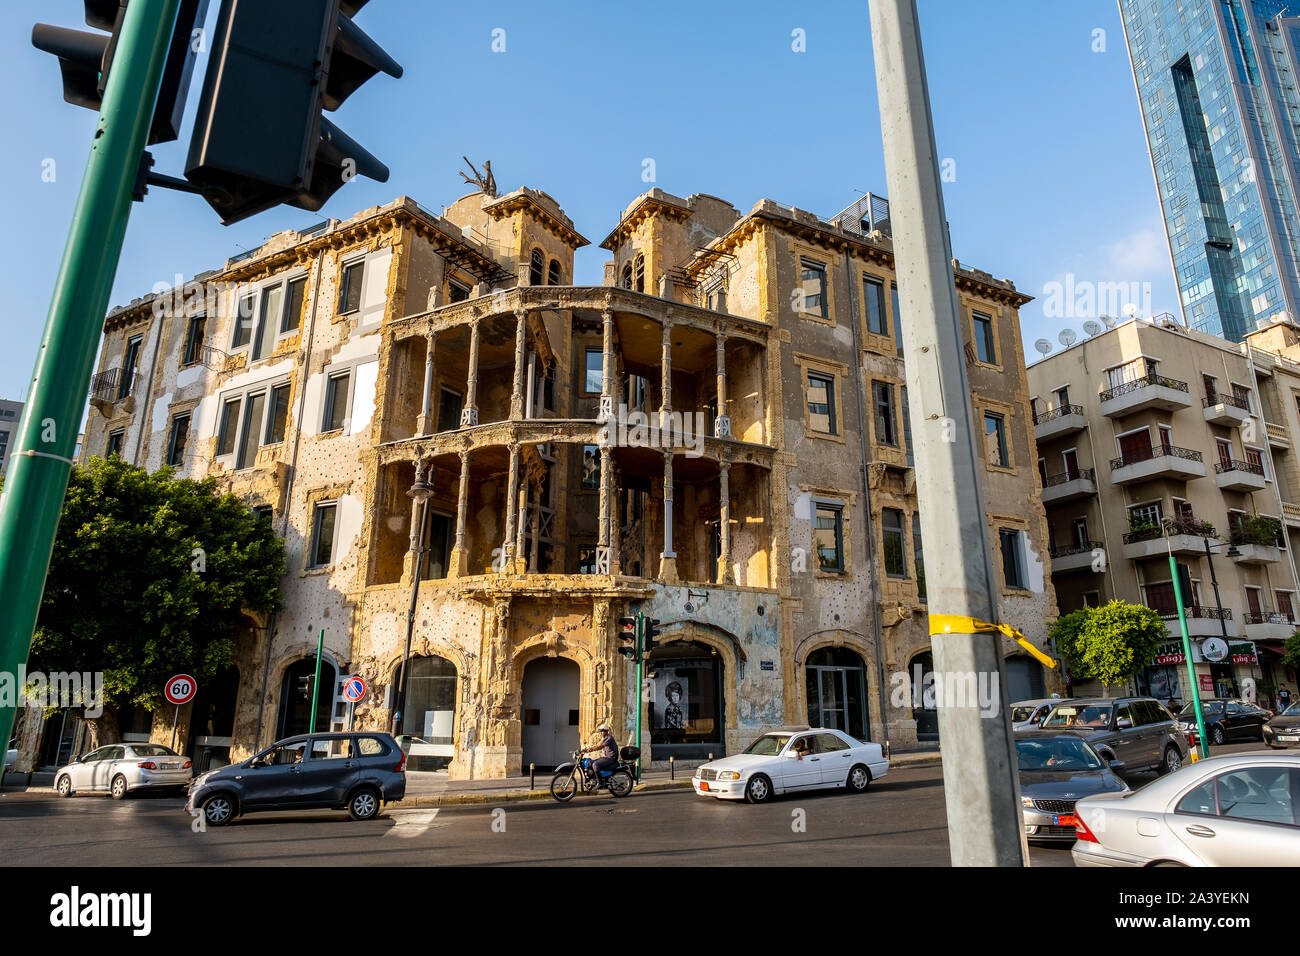 The Yellow House, also called Barakat building or Beit Beirut, Cultural Center dedicated to the historical memory of the Civil War, Beirut. Lebanon. Stock Photo